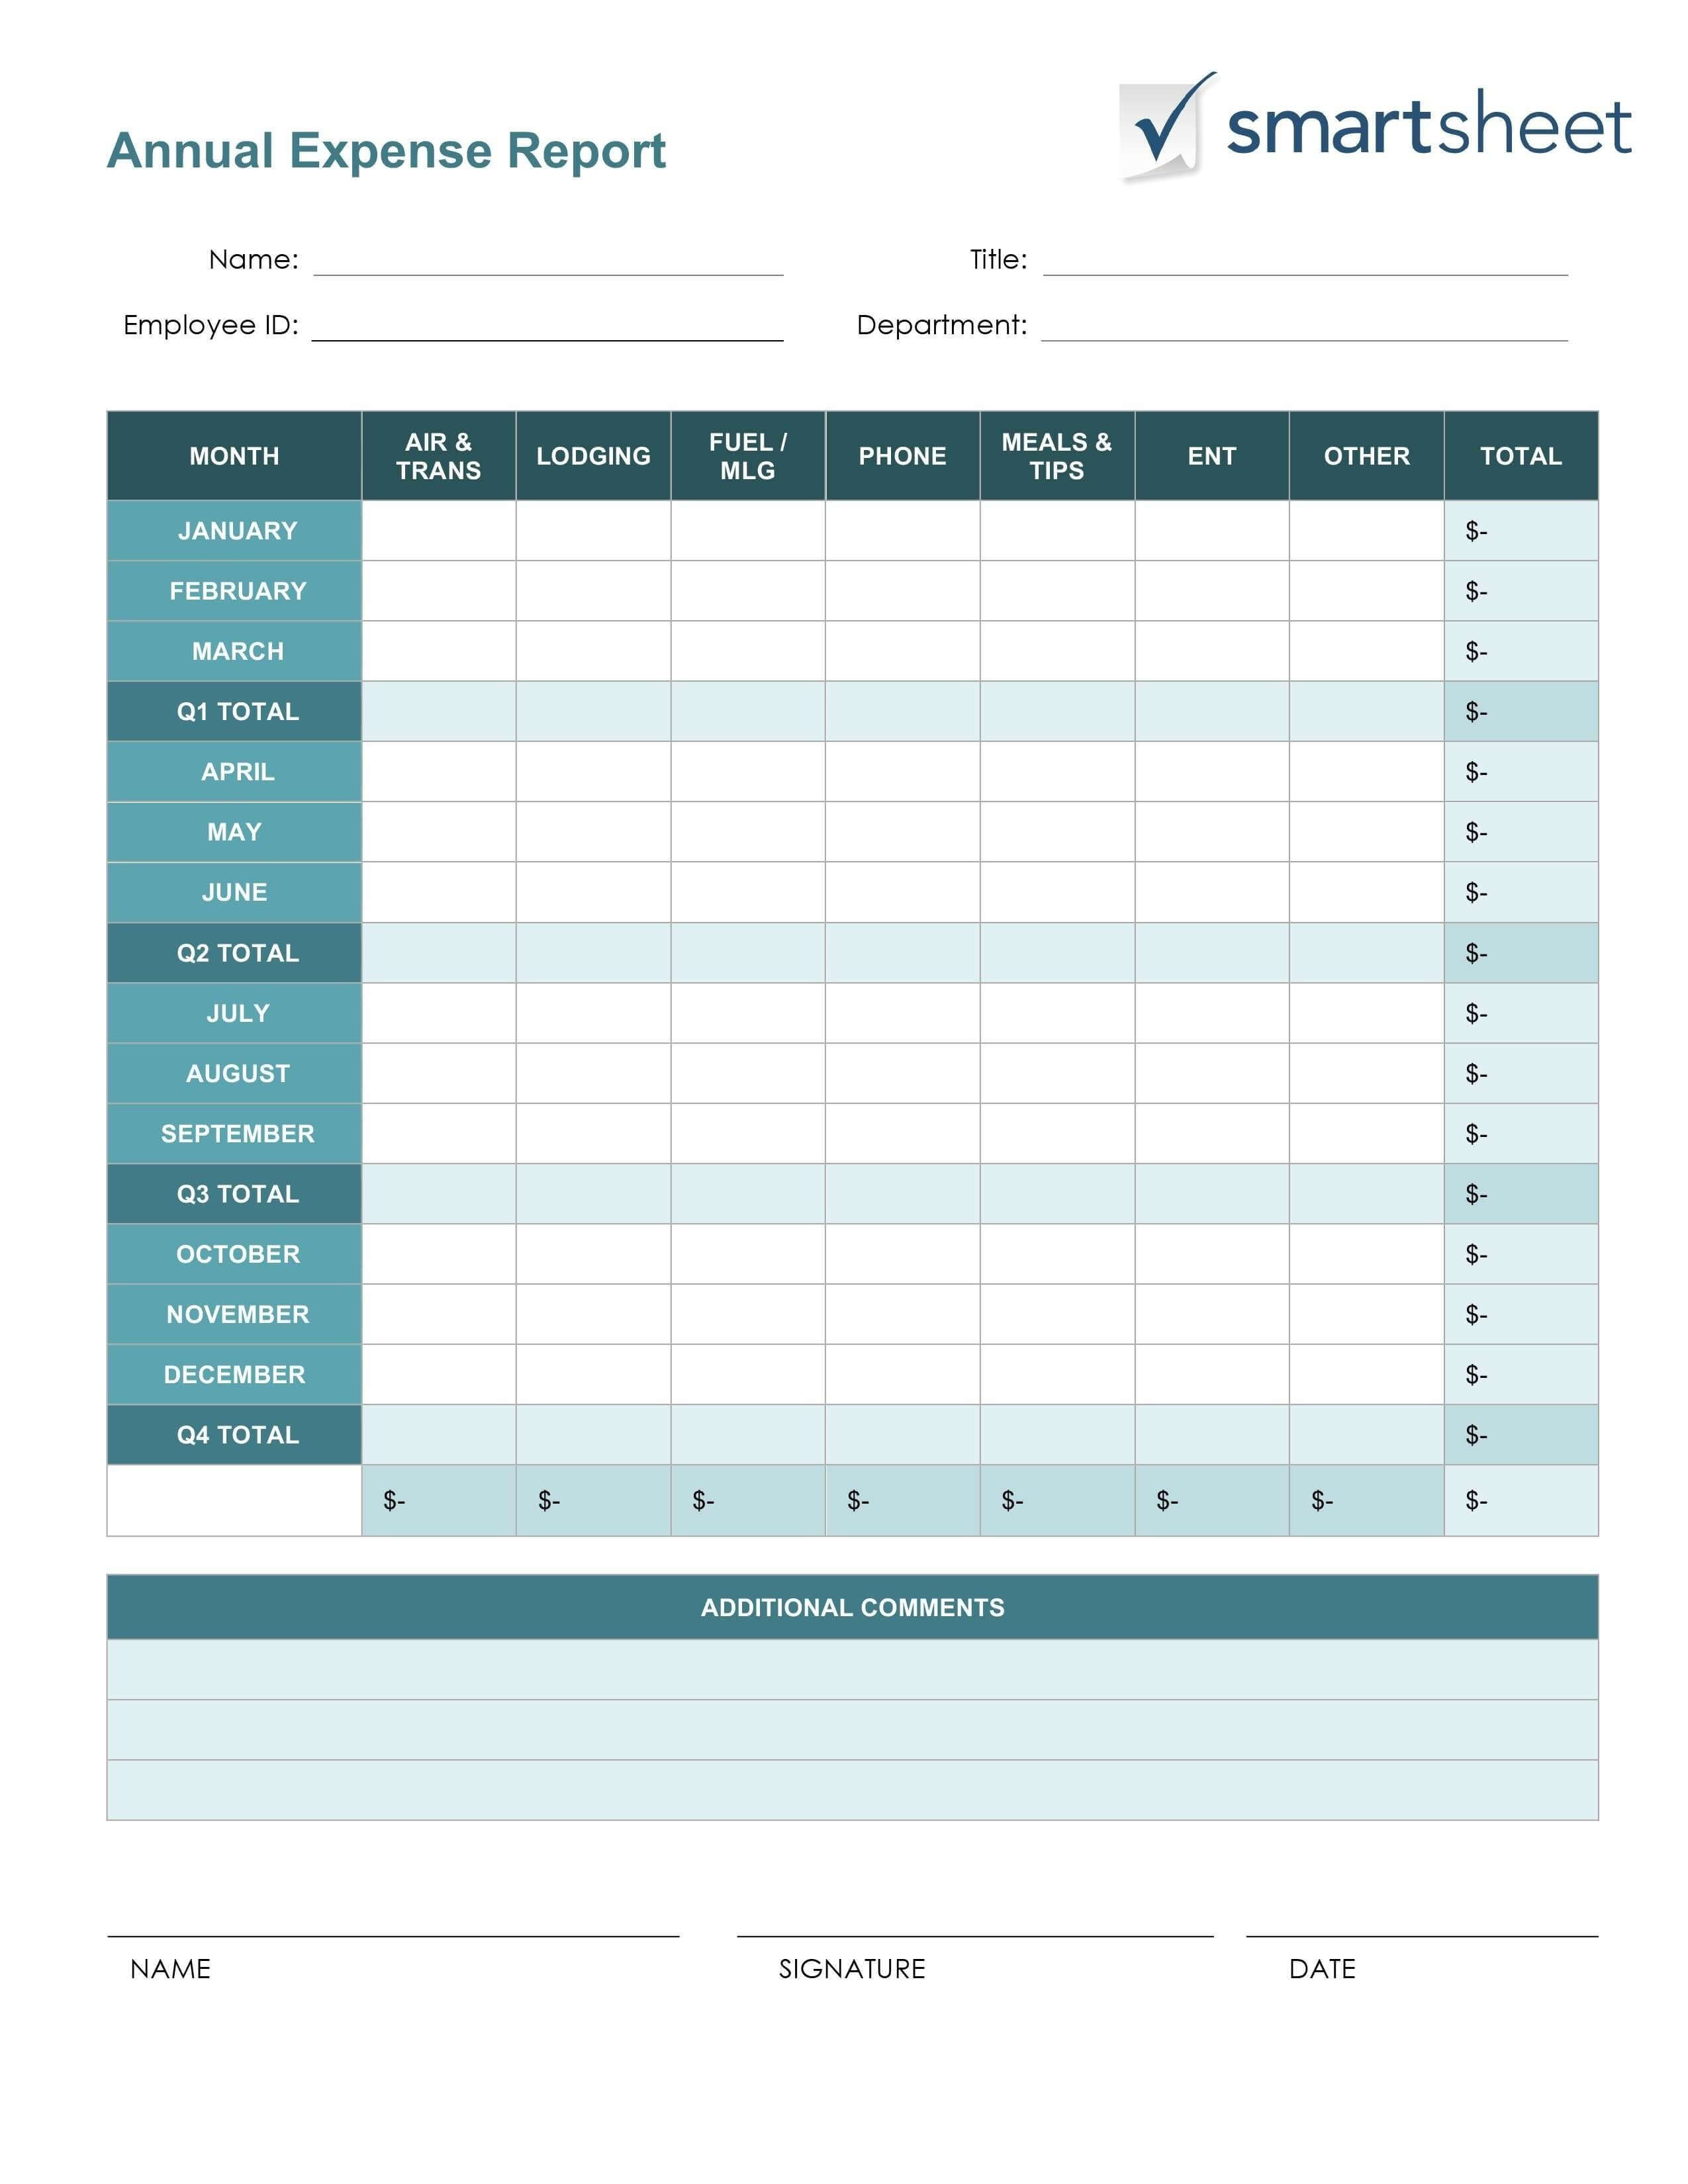 New Expenses Excel #exceltemplate #xls #xlstemplate Intended For Annual Budget Report Template